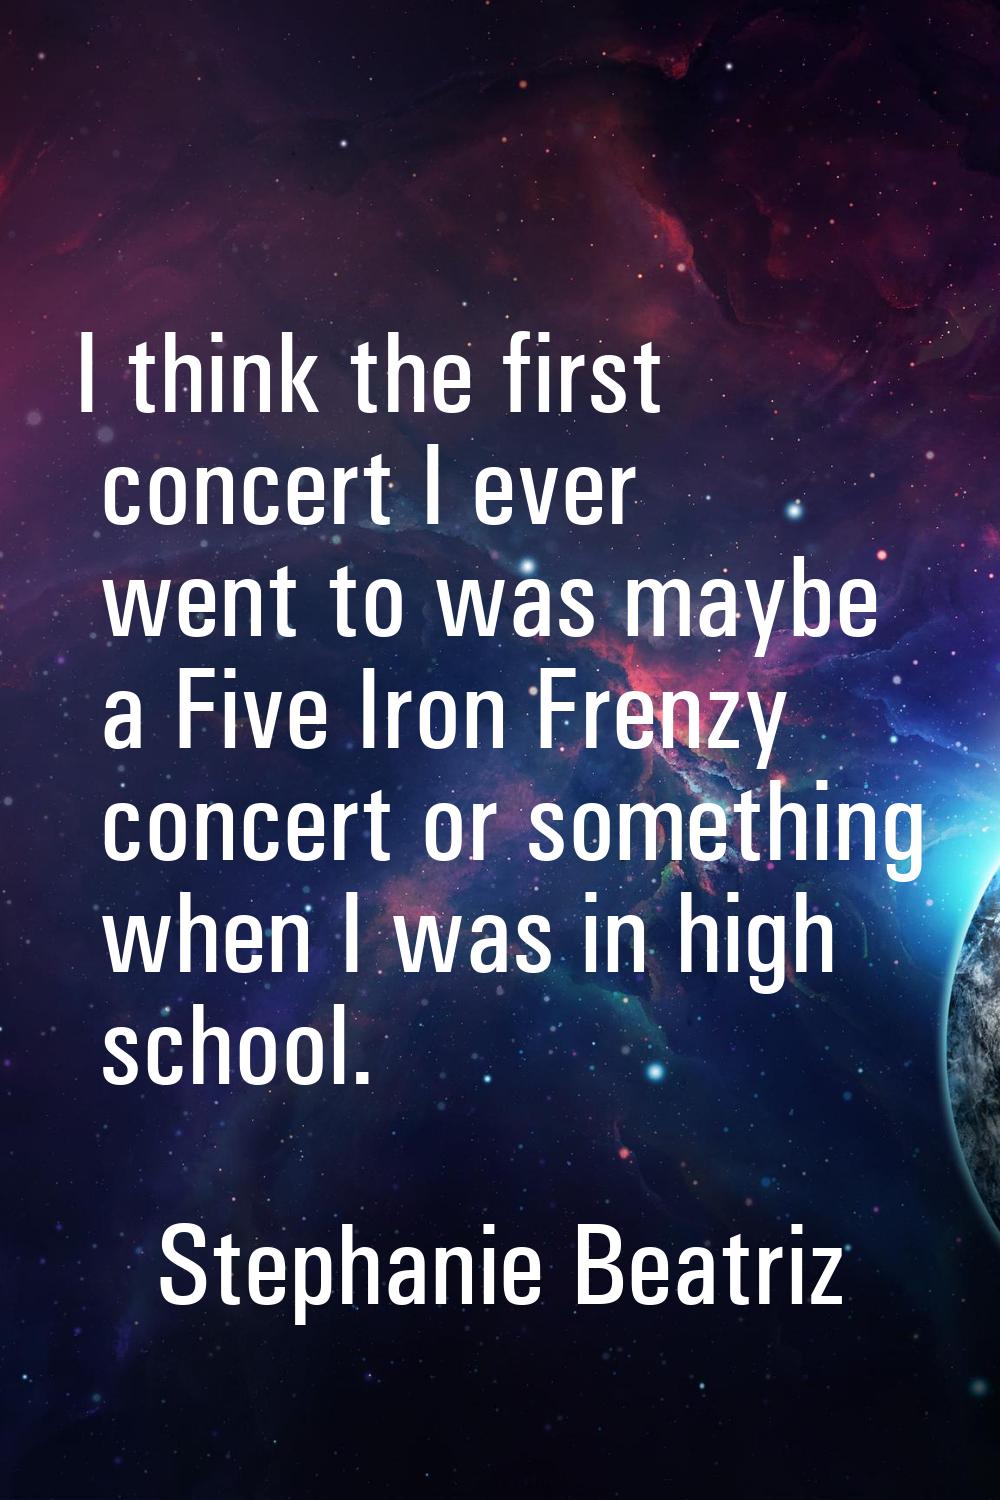 I think the first concert I ever went to was maybe a Five Iron Frenzy concert or something when I w